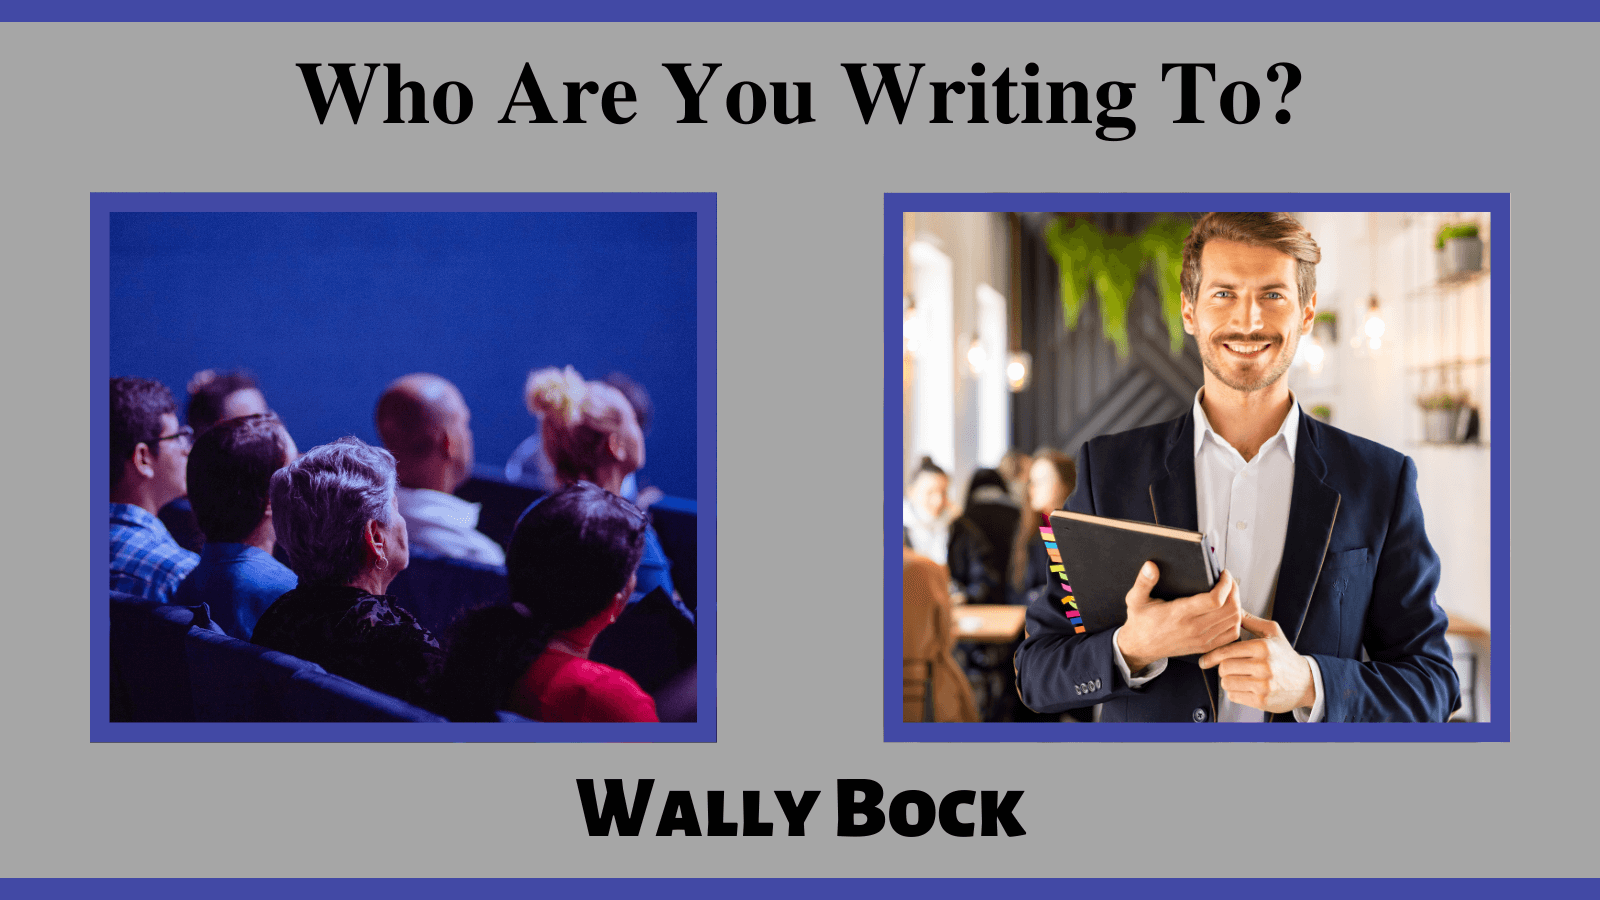 who are you writing to?